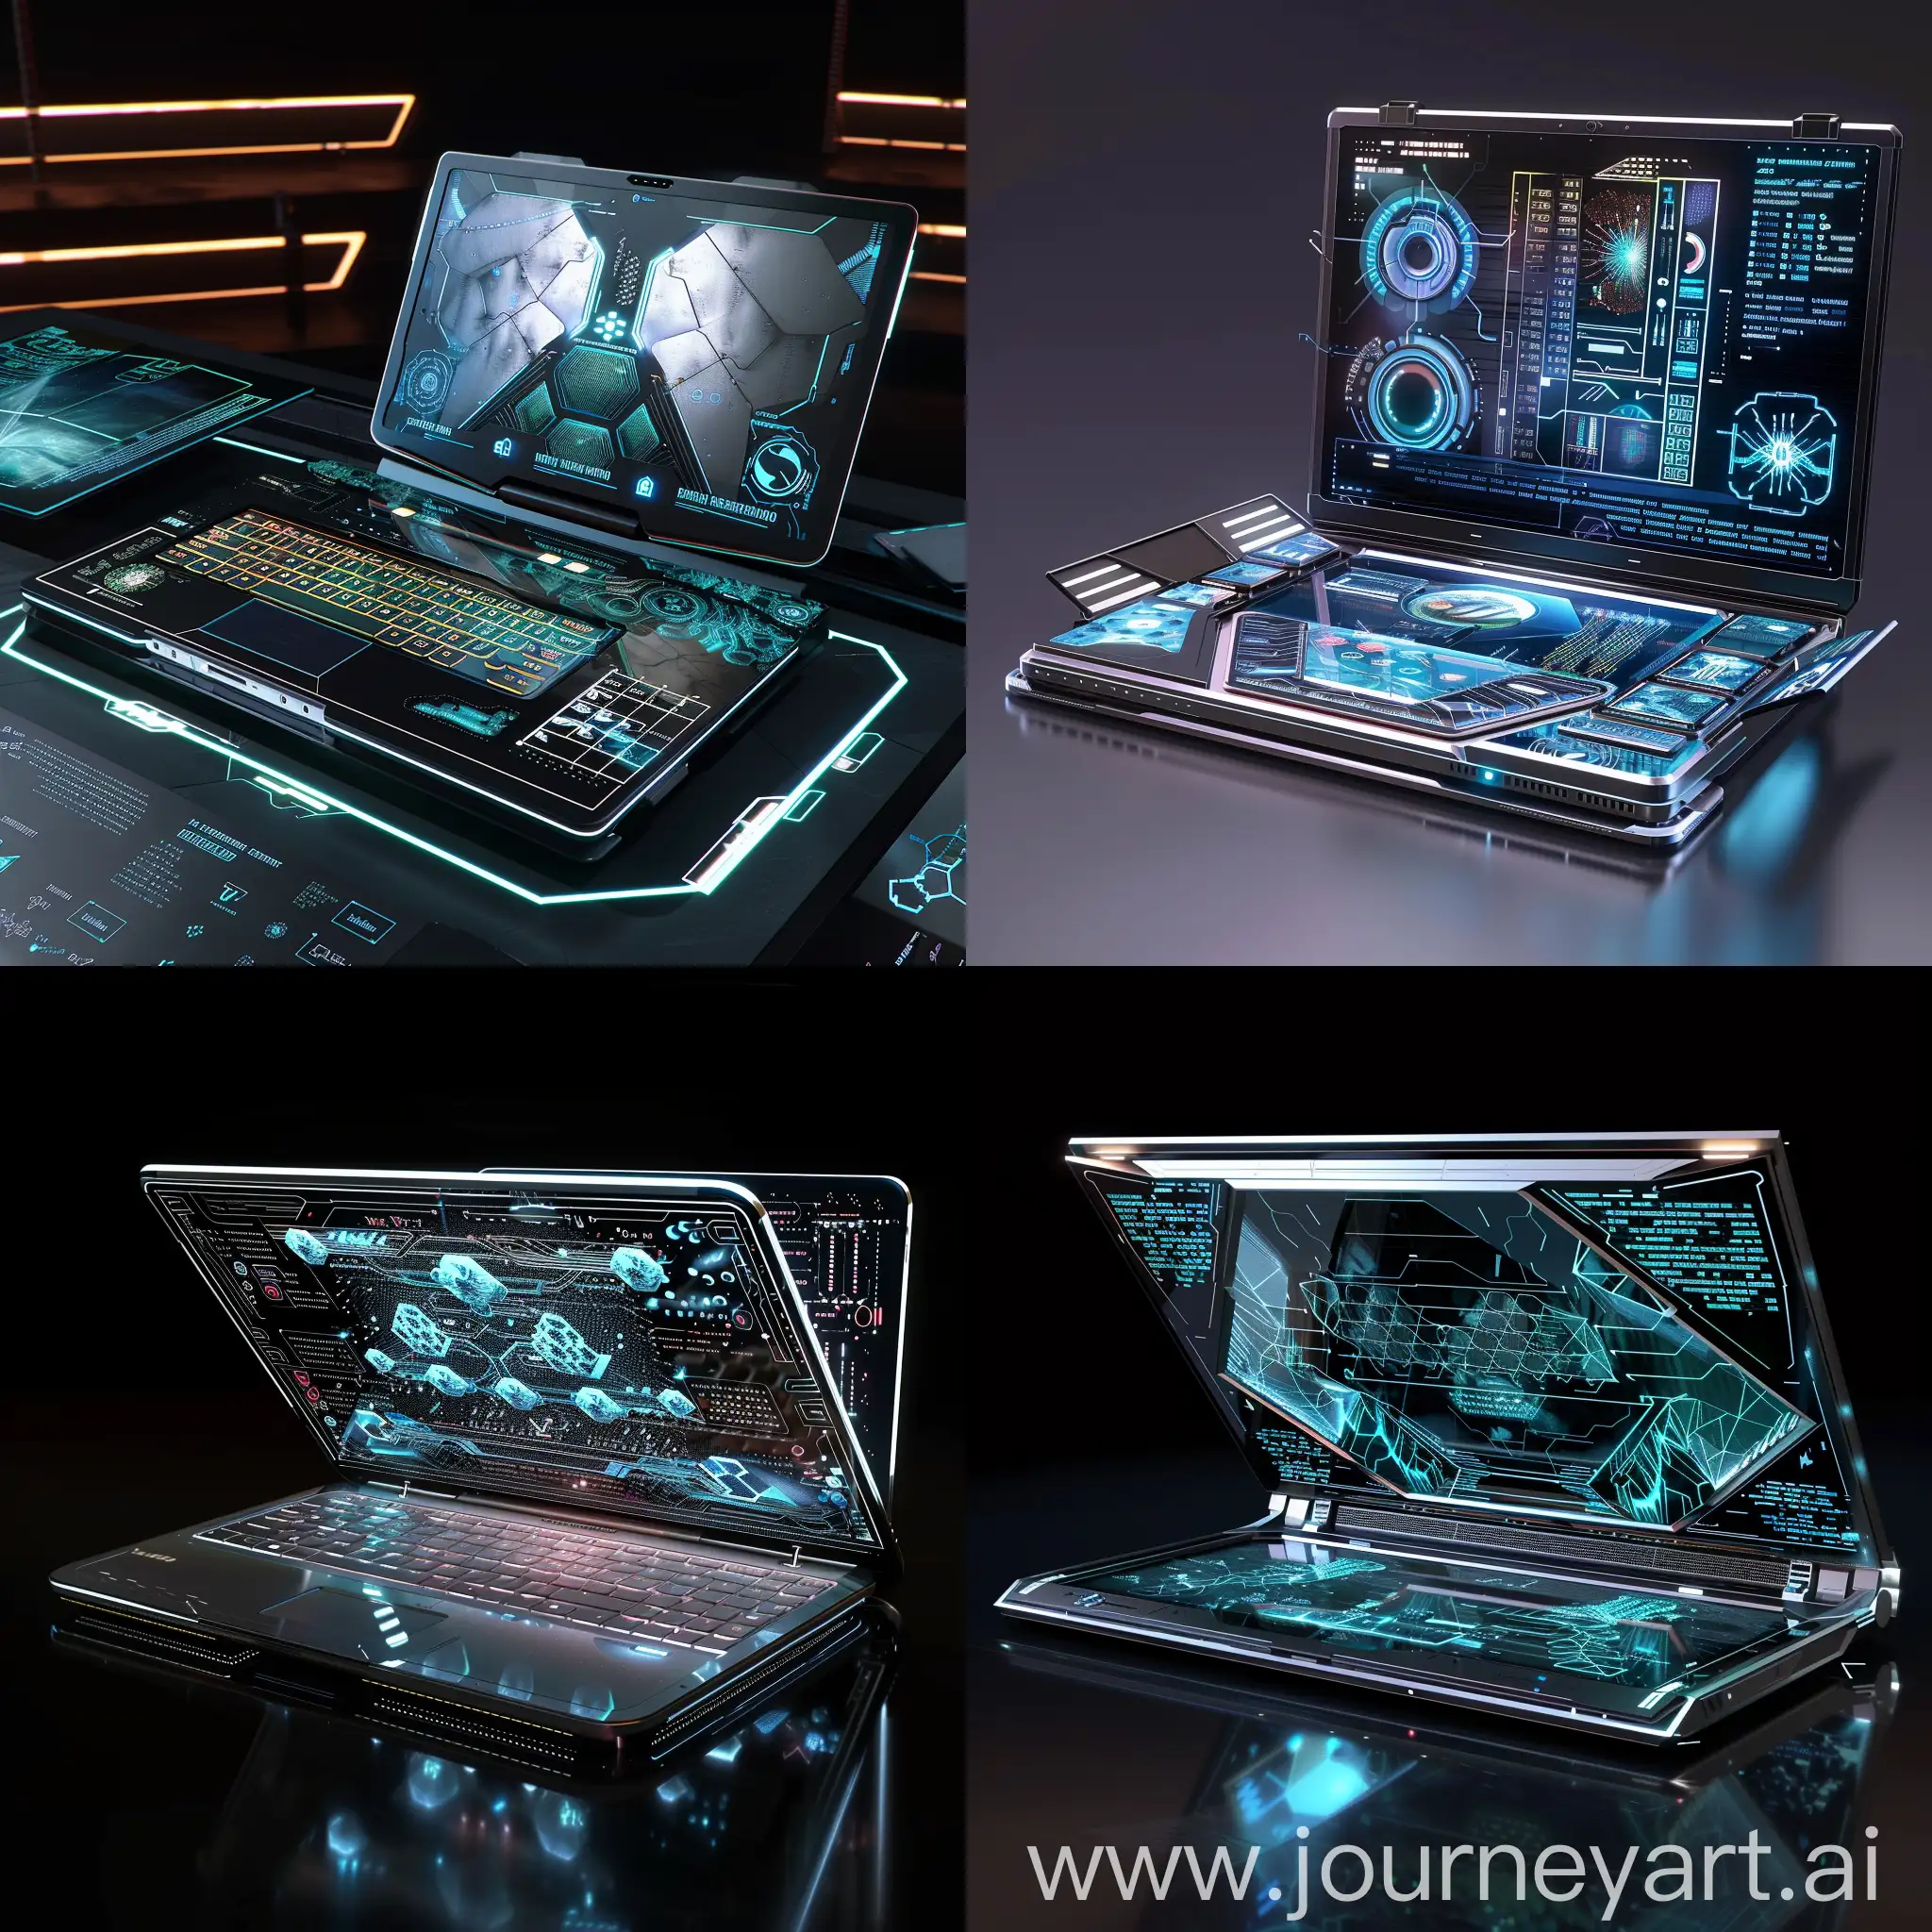 Futuristic laptop, in futuristic style, Quantum Processing Units (QPUs), Graphene-Based Components, Neural Processing Units (NPUs), Optical Data Transfer, Advanced Battery Technology, Self-Healing Circuits, Integrated 3D Chip Stacking, Holographic Data Storage, Flexible and Foldable Display, Bio-Inspired Cooling System, Flexible and Foldable Screens, Holographic Displays, Touchscreen Keyboards, Biometric Security Enhancements, Modular Design, Solar-Powered Surfaces, Adaptive Chassis Materials, Edge-to-Edge Displays, Augmented Reality Interfaces, E-ink Secondary Displays, Topological Insulator-Based Transistors, Weyl Semimetal Processors, Dirac Semimetal Interconnects, Bismuth Telluride Thermoelectric Coolers, Graphene-Based Memory Storage, Antimony-Based Quantum Dots for Displays, Flexible Thermoelectric Generators, Topological Insulator Surface States for Enhanced Security, Semimetal-Assisted Optical Communication, Straintronics Using Semimetal Films, Graphene-Based Flexible Displays, Bismuth-Based Thermoelectric Surface Cooling, Antimony-Infused Touchpads, Graphene-Enhanced Audio Systems, Topological Insulator Security Modules, Weyl Semimetal Structural Frames, Graphene-Based Solar Panels, Antimony-Doped Smart Glass, Bismuth Alloy Hinges, Graphene-Infused Protective Coatings, unreal engine 5 --stylize 1000